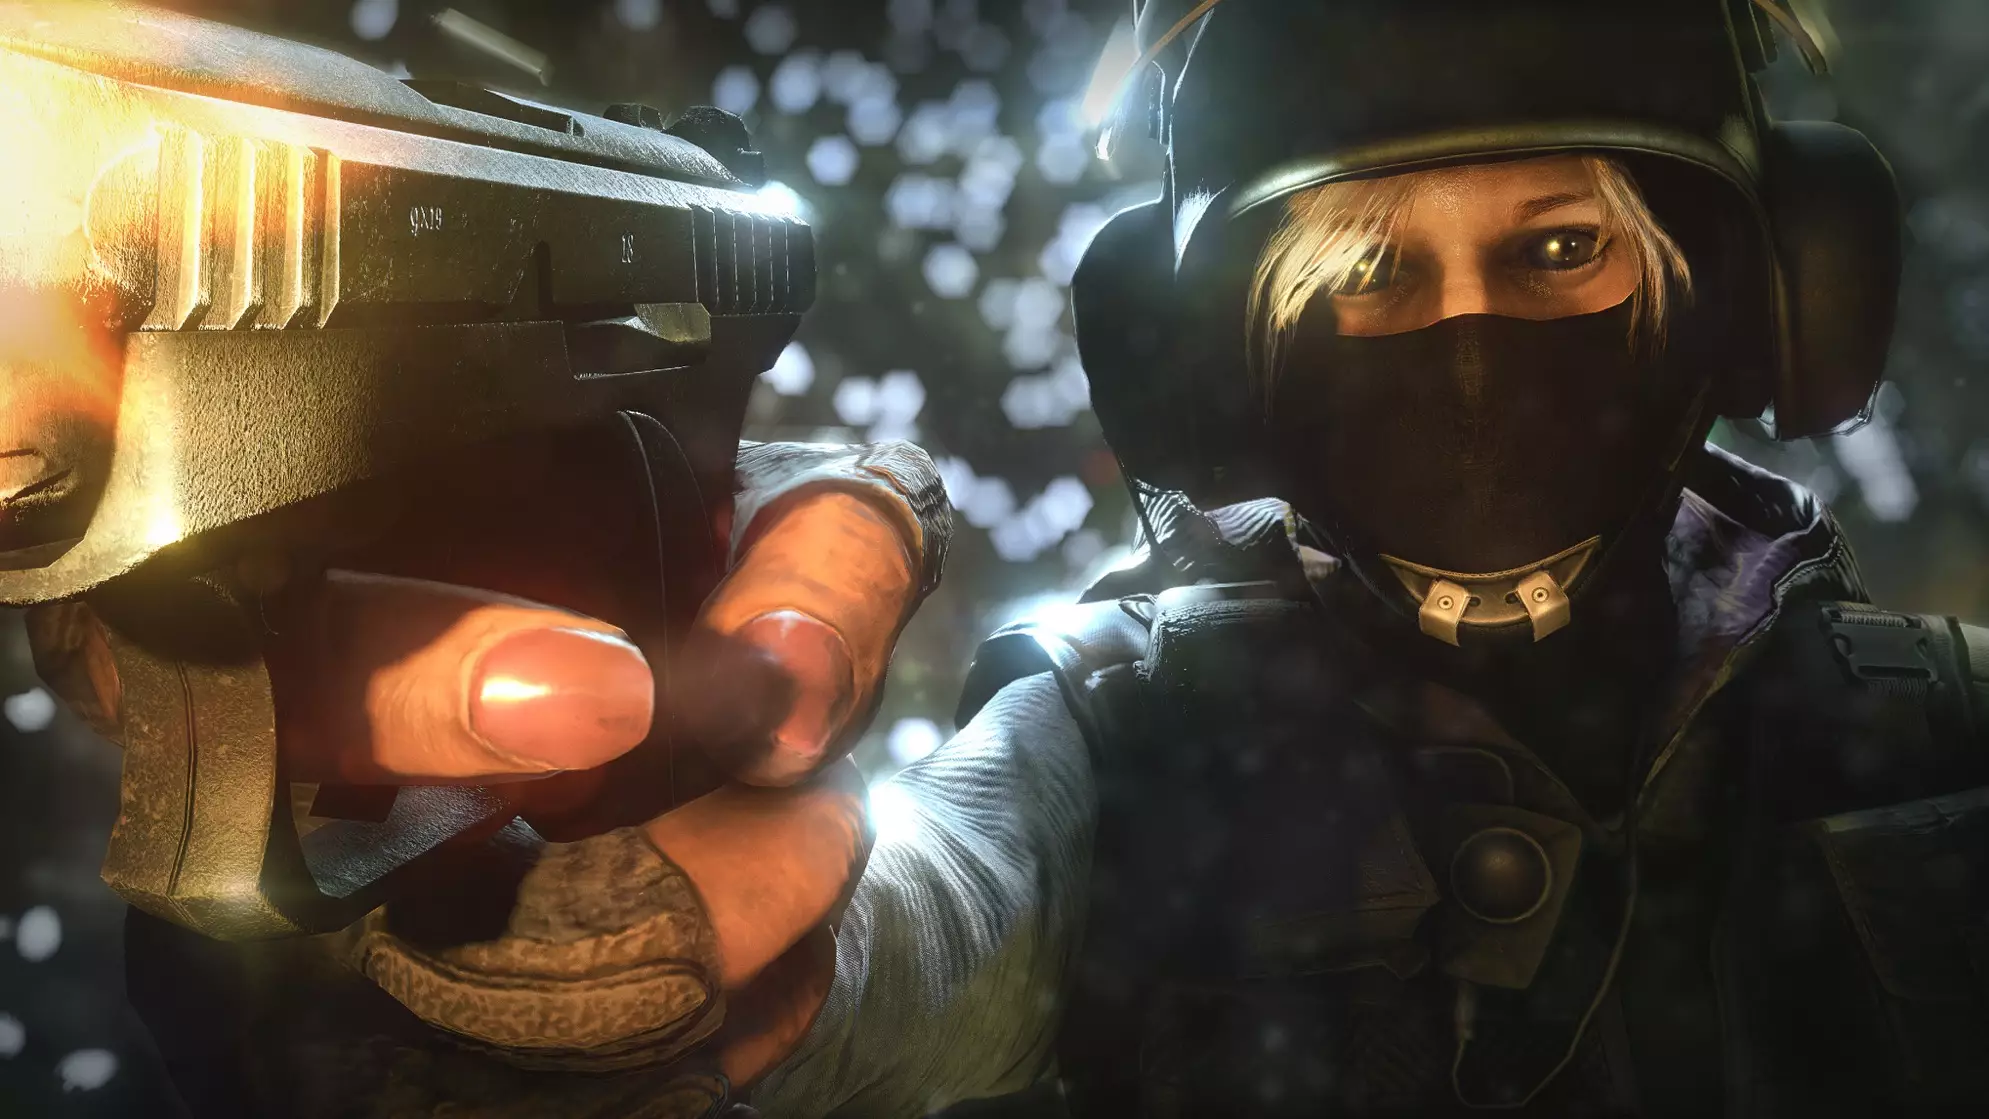 Rainbow Six Siege Is Now Banning People Who Use Slurs And Hate Speech